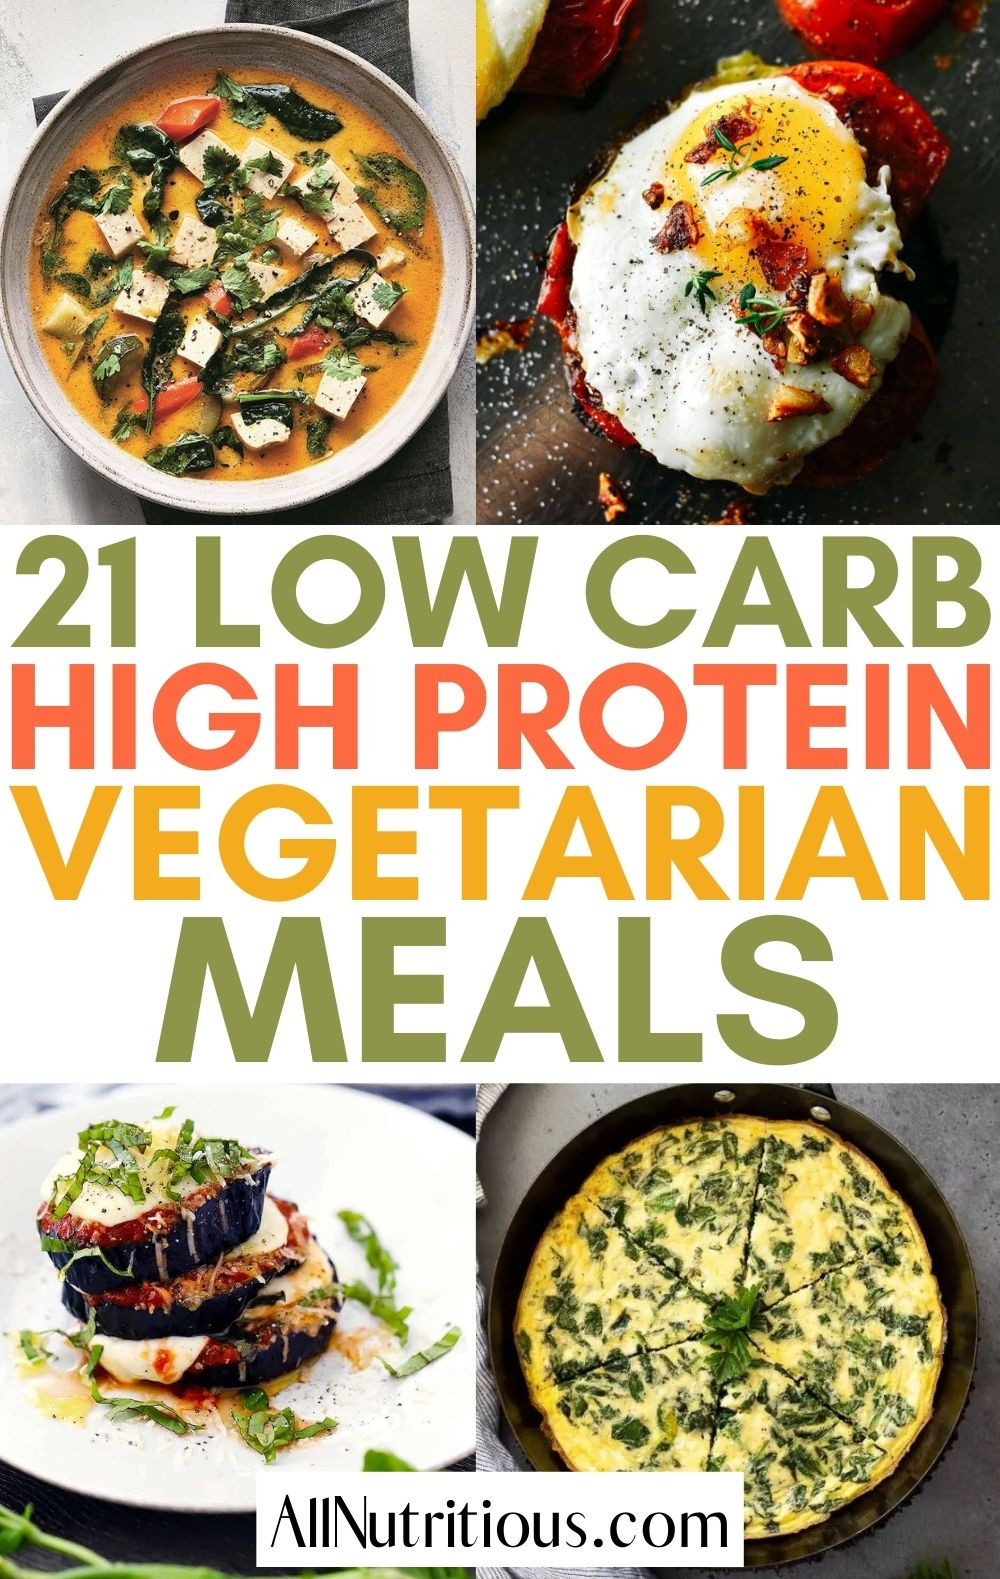 High Protein Low Carb Vegetarian Recipes Awesome 21 High Protein Low Carb Ve Arian Meals All Nutritious